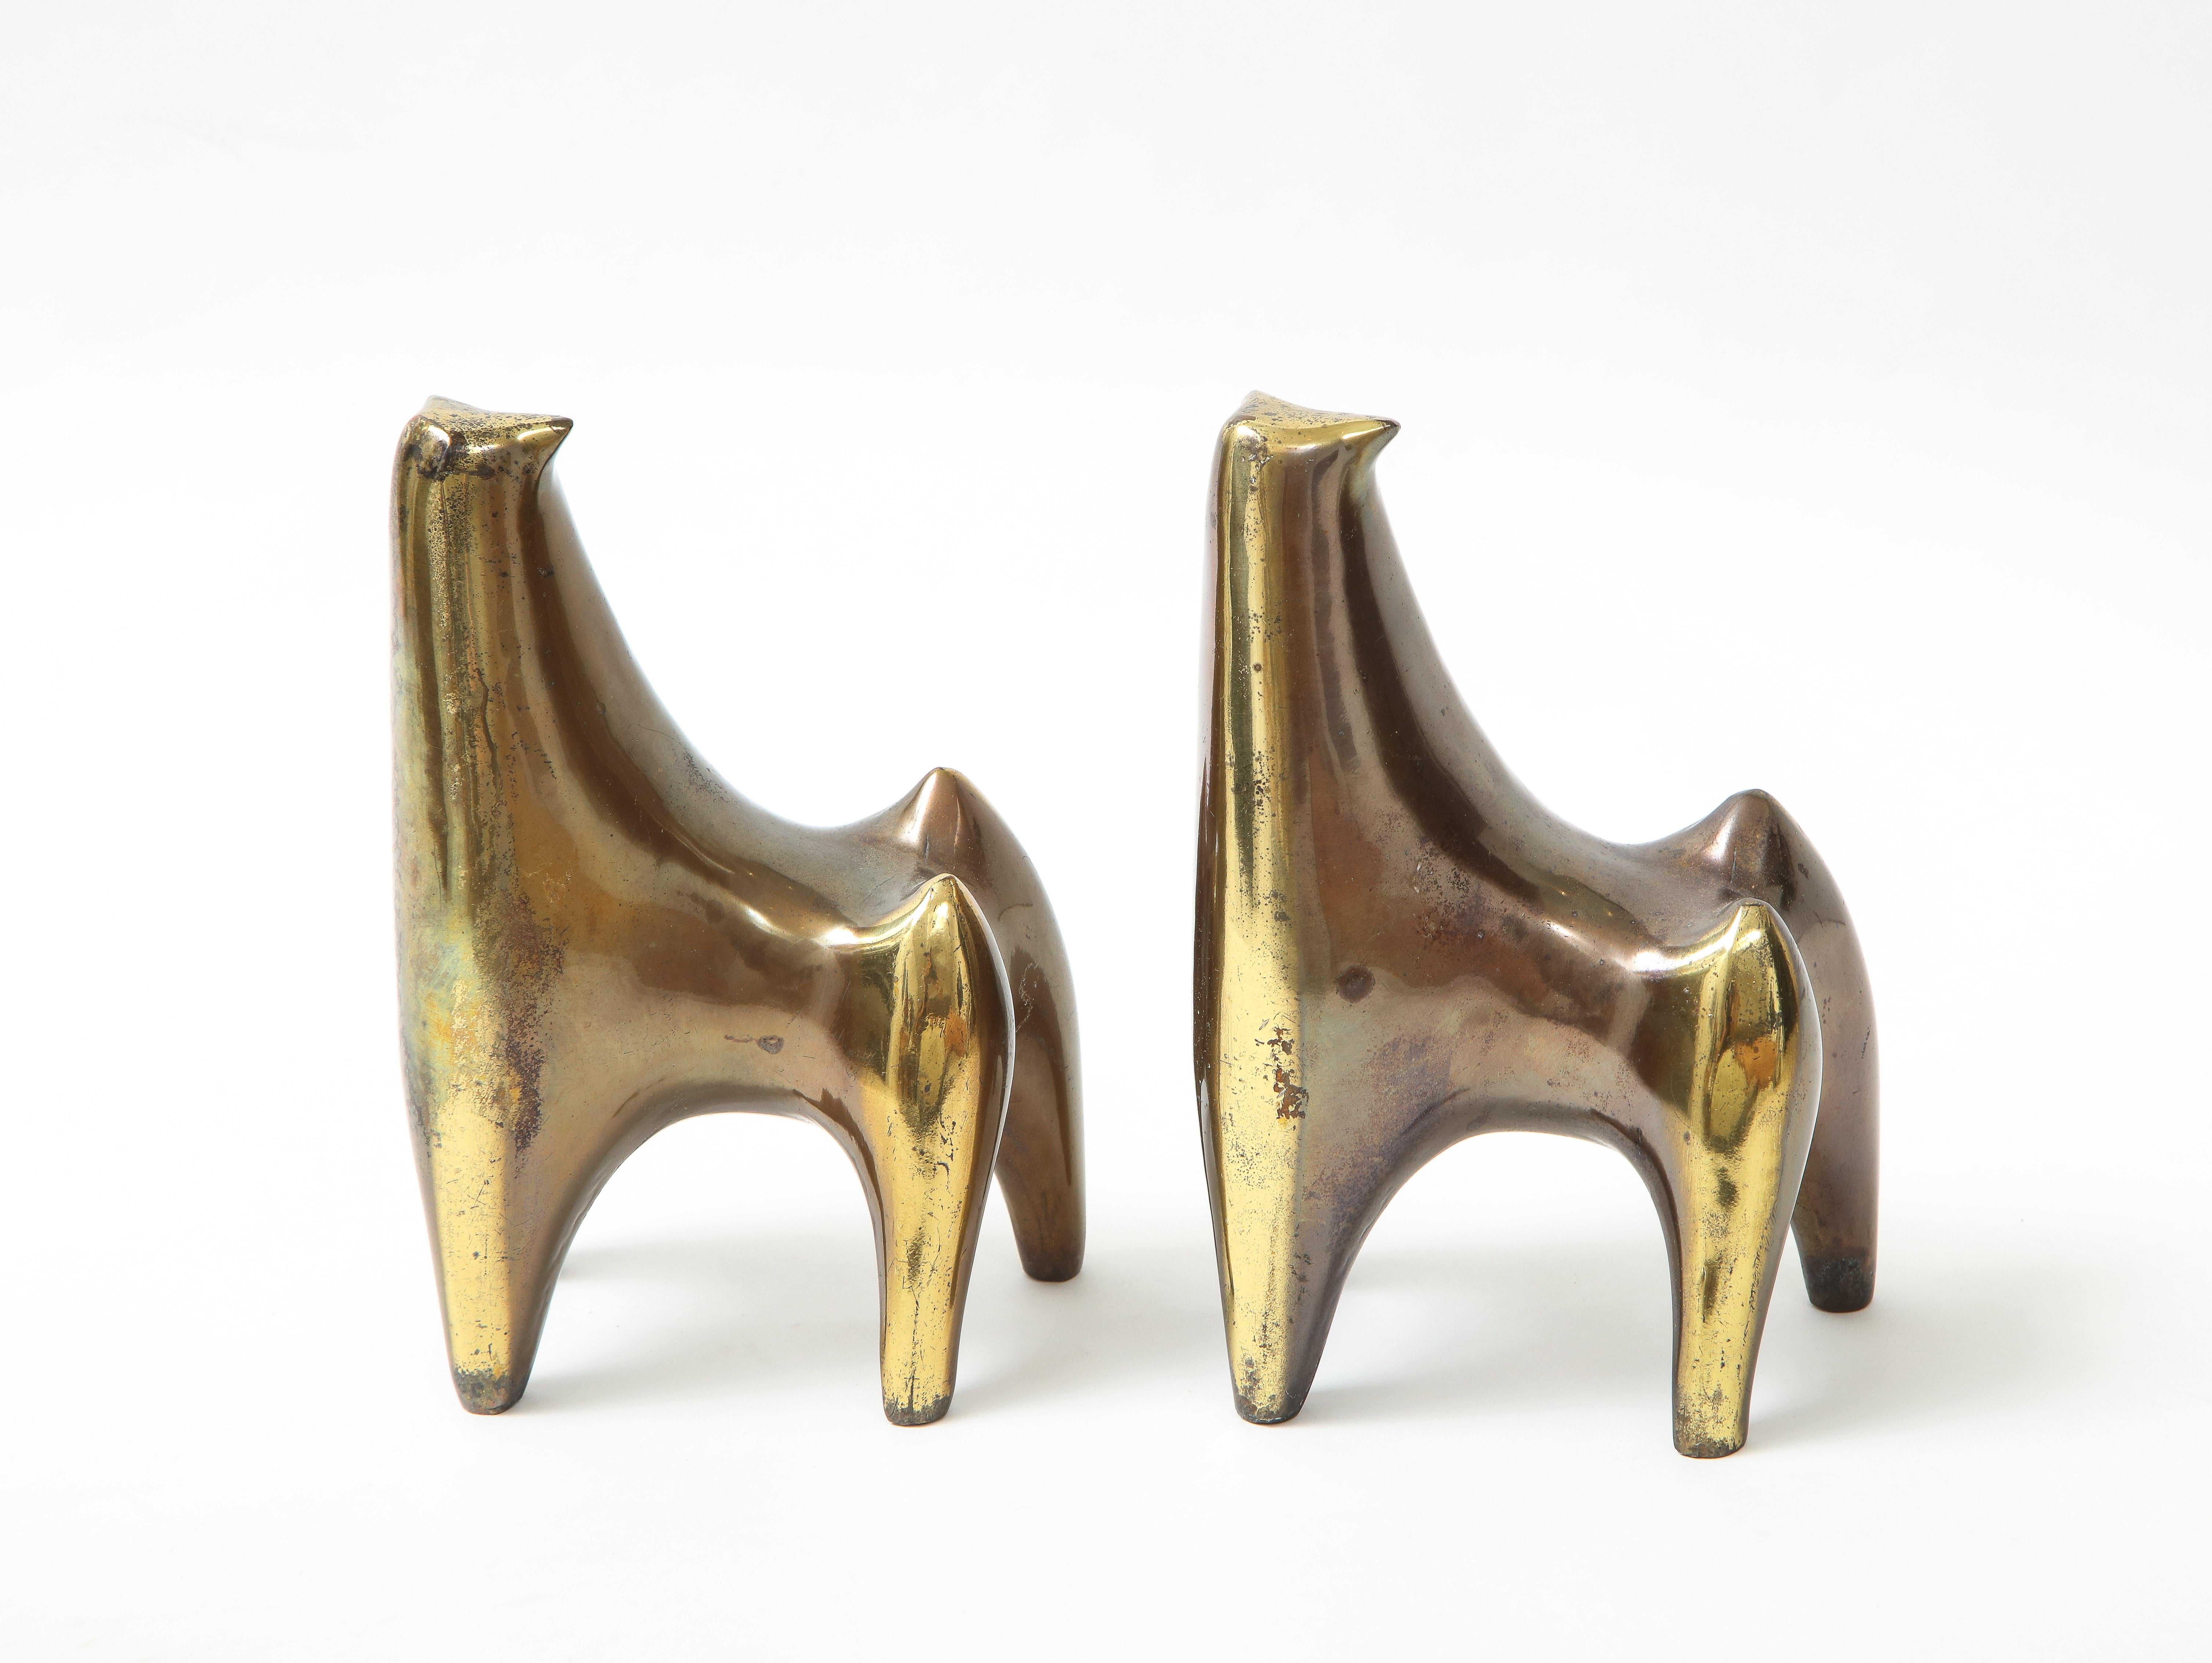 Pair of mid century bronze stylized bull bookends by Ben Seibel for Jenfredware.